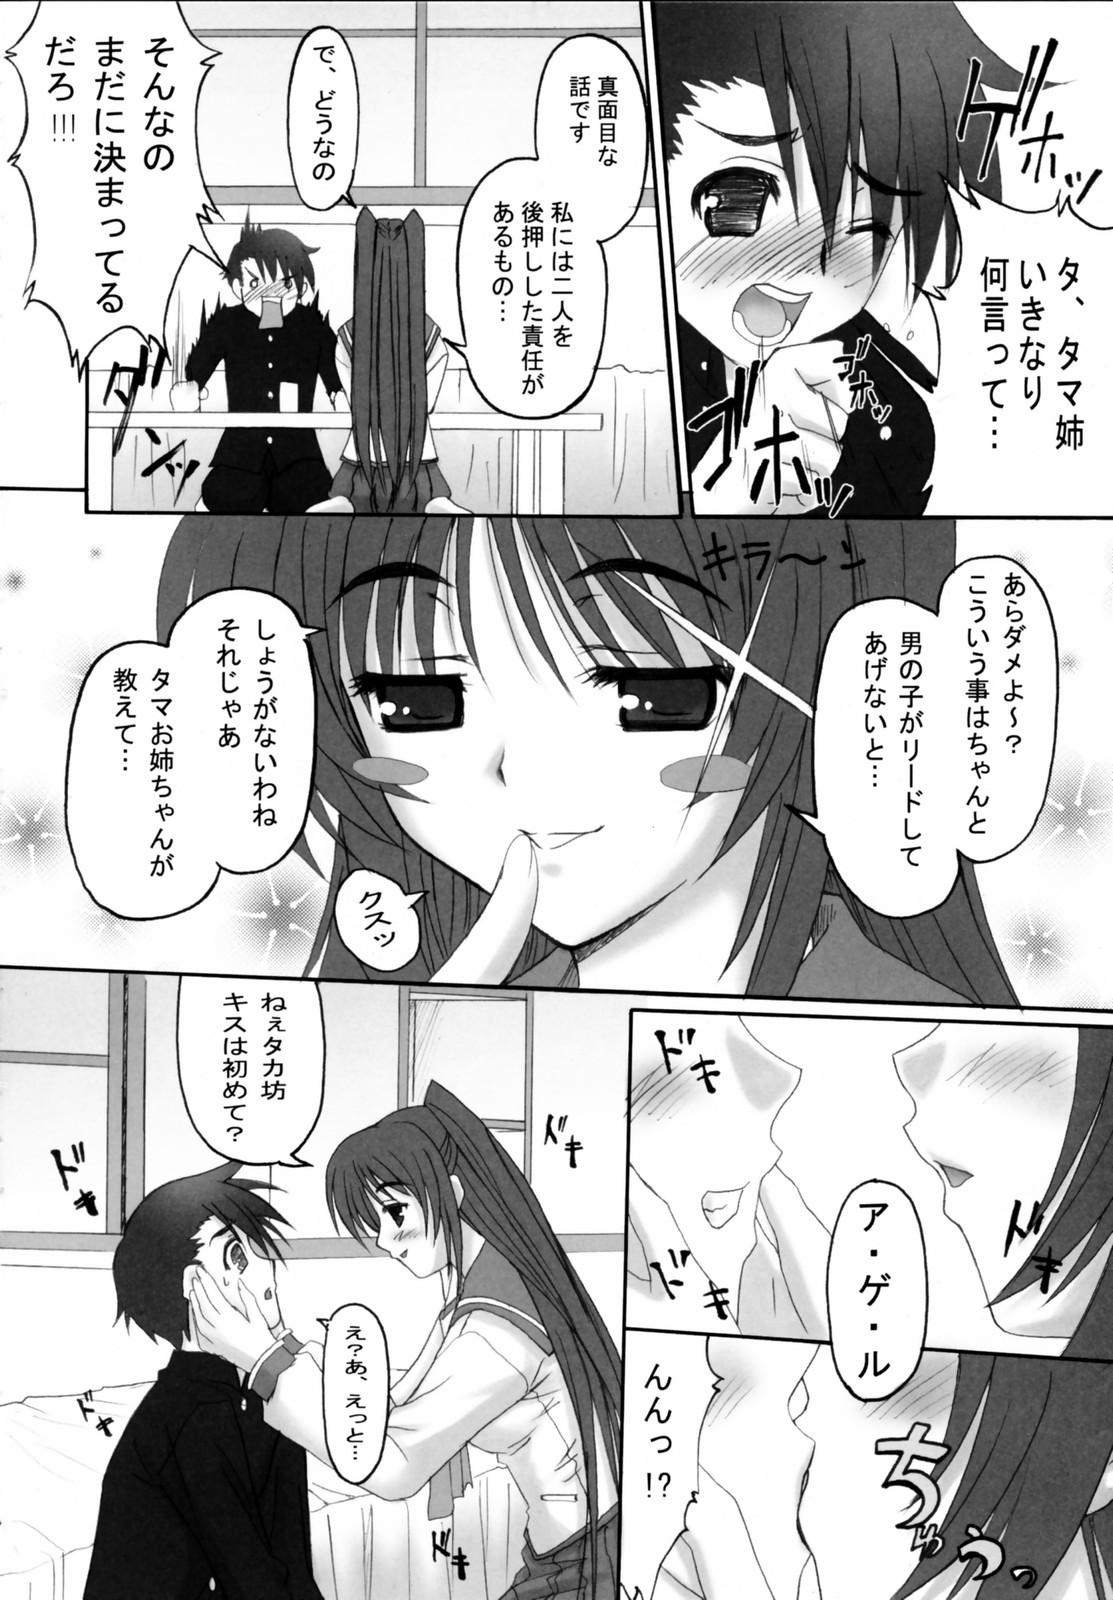 Chinese Tamayura - Toheart2 Trimmed - Page 5